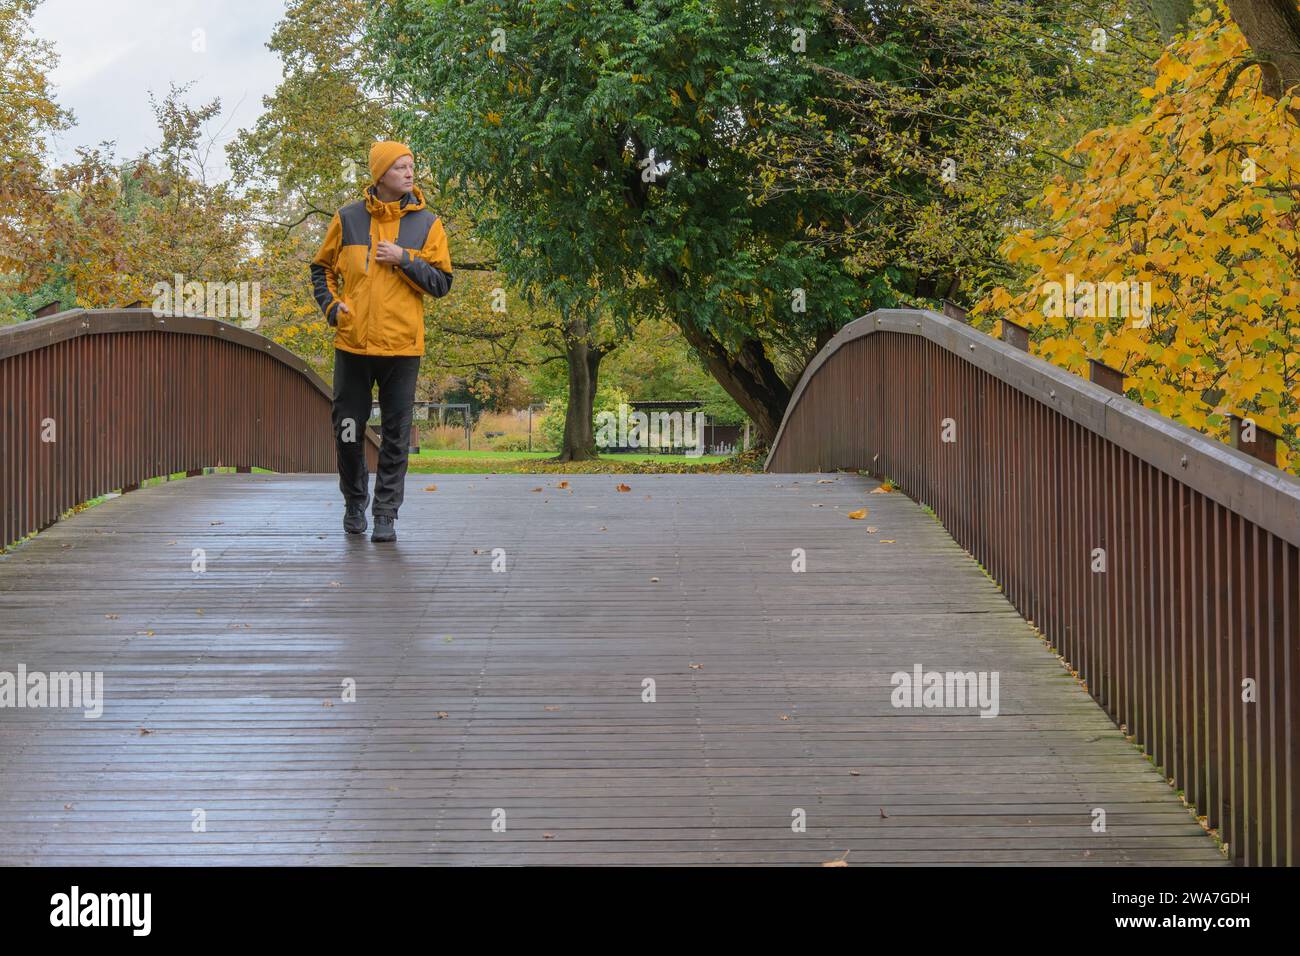 Autumn, bridge and a man in a yellow jacket. Stock Photo